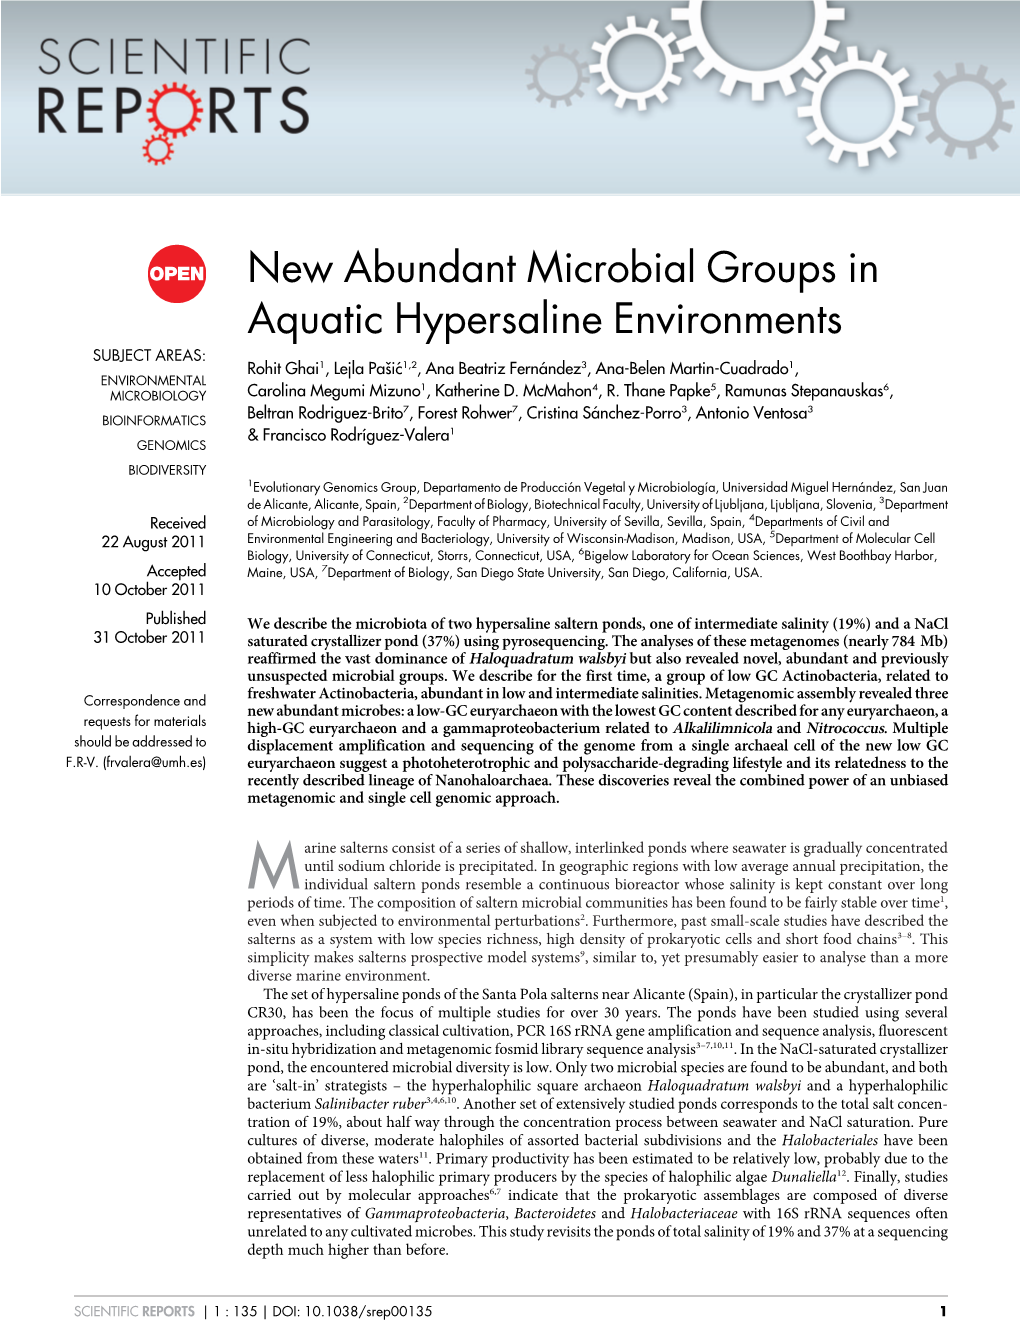 New Abundant Microbial Groups in Aquatic Hypersaline Environments